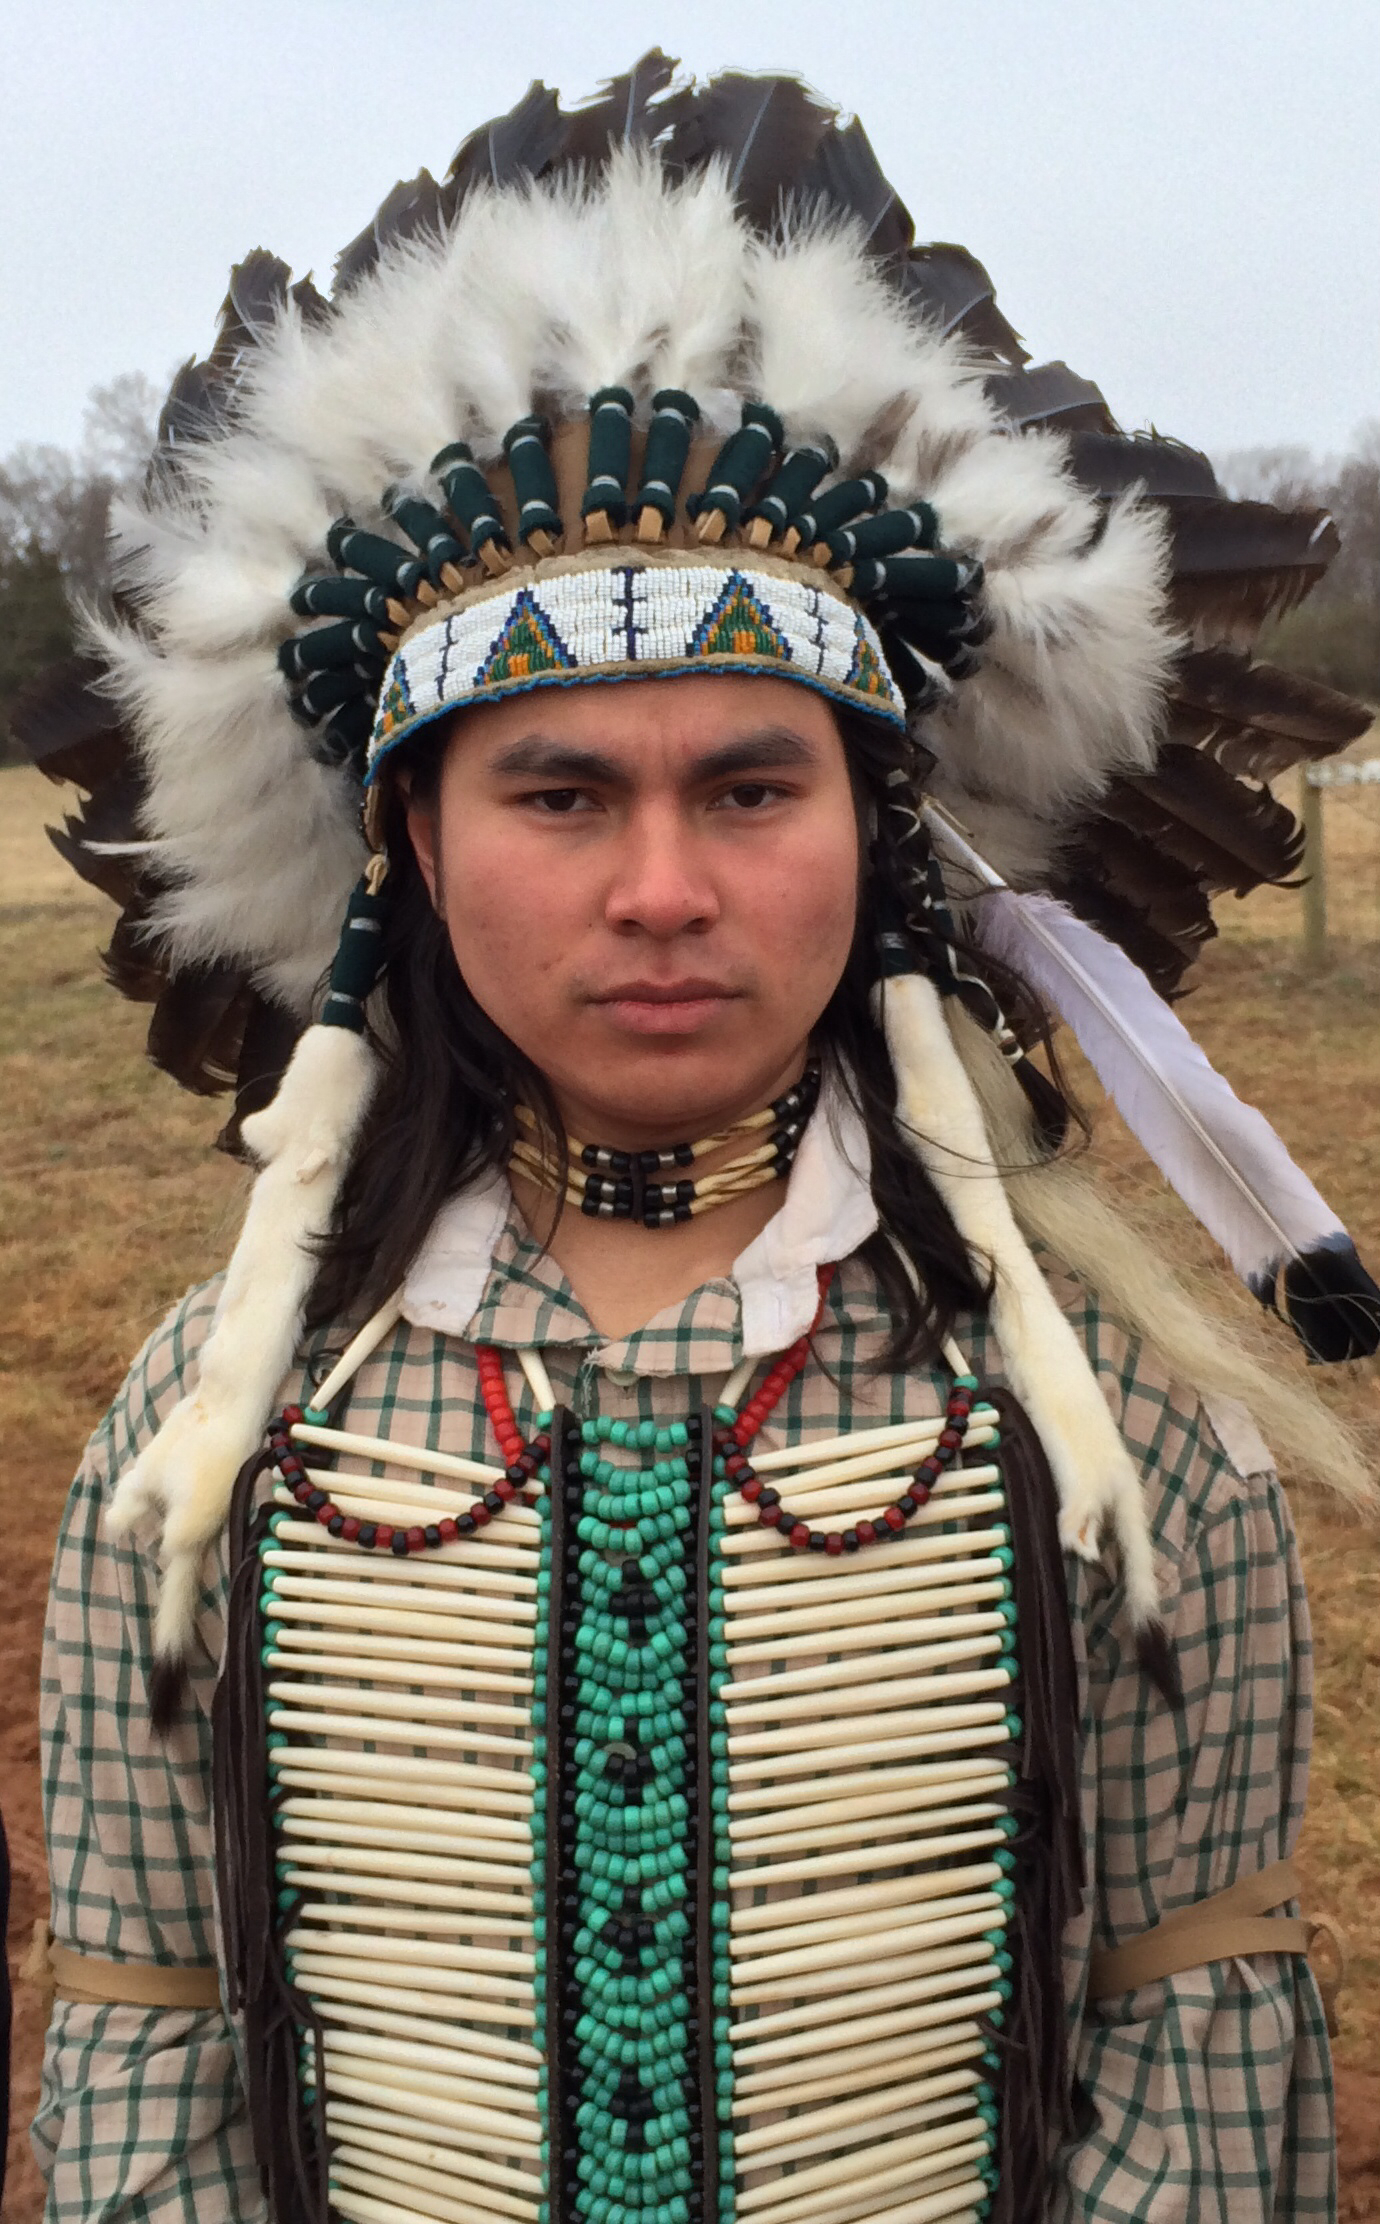 Me as a Native American Chief for the Fox series 